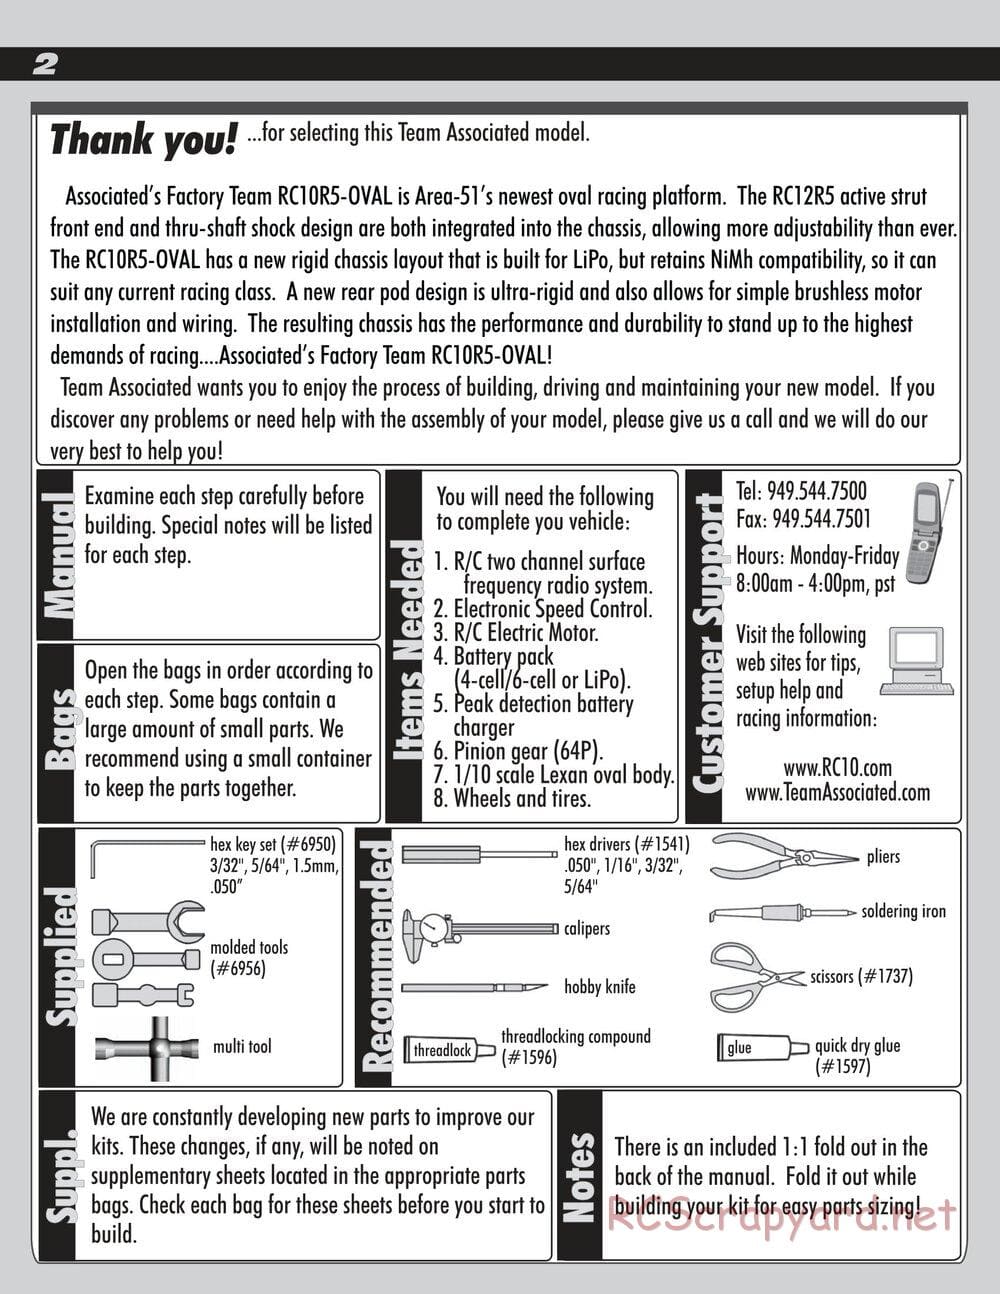 Team Associated - RC10R5 Oval Factory Team - Manual - Page 2